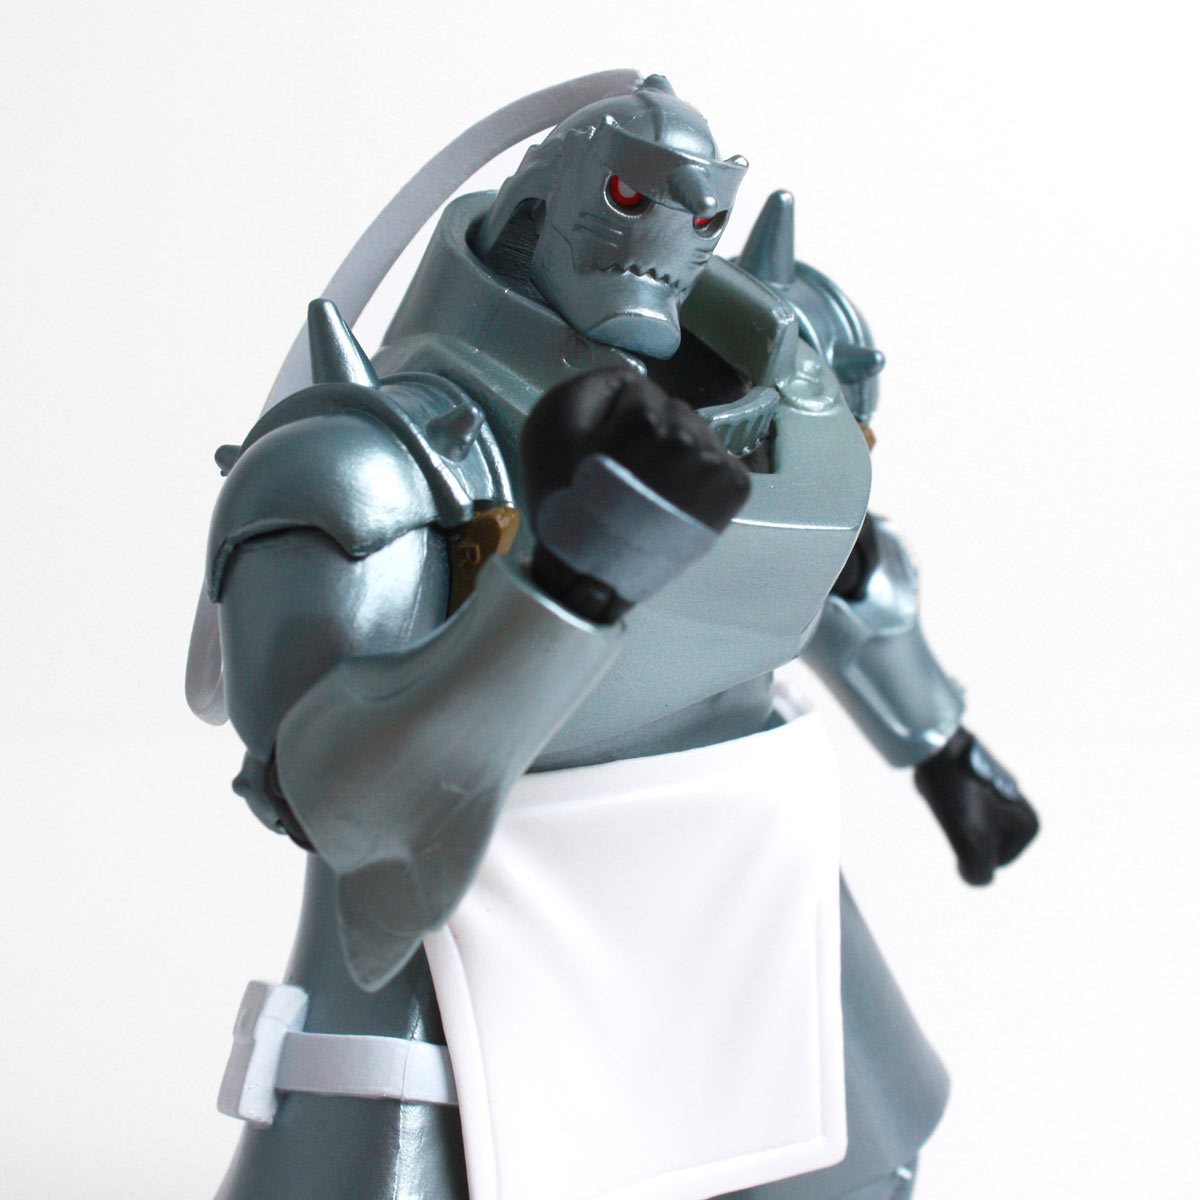 Fullmetal Alchemist BST AXN Edward and Alphonse Elric Figures Loyal Subjects for sale online 